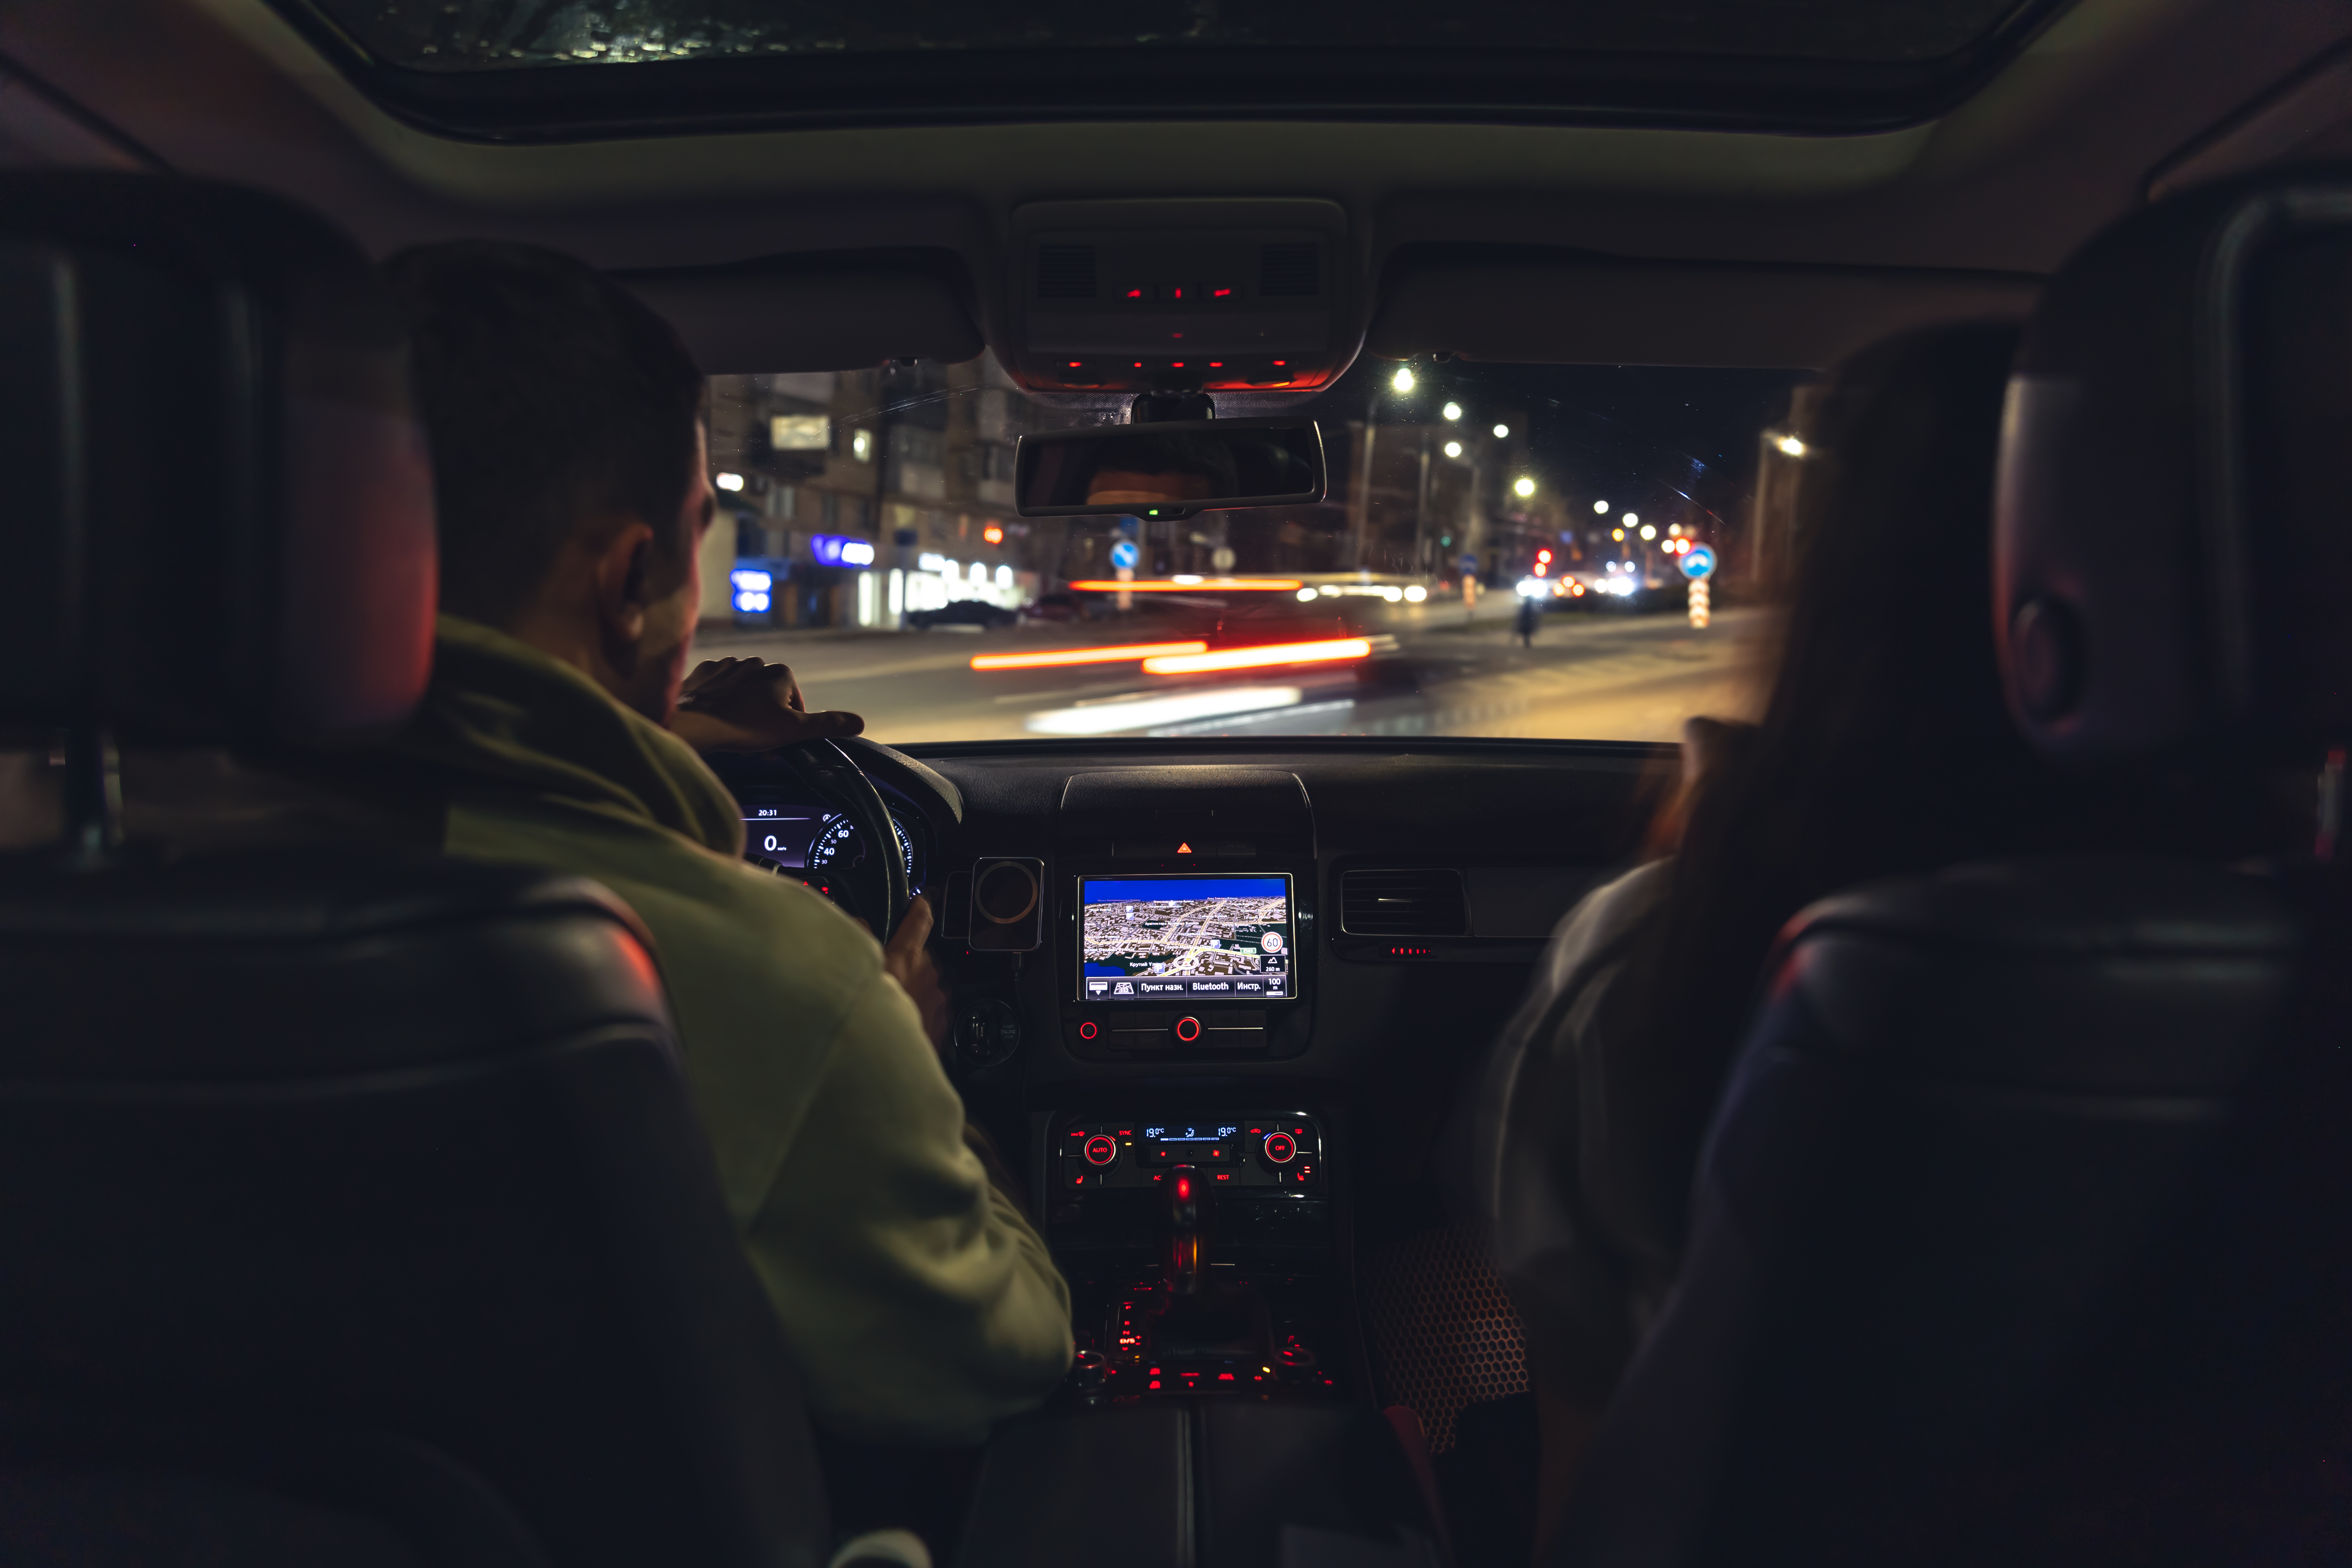 Family driving at night. For illustration purposes only | Source: Freepik